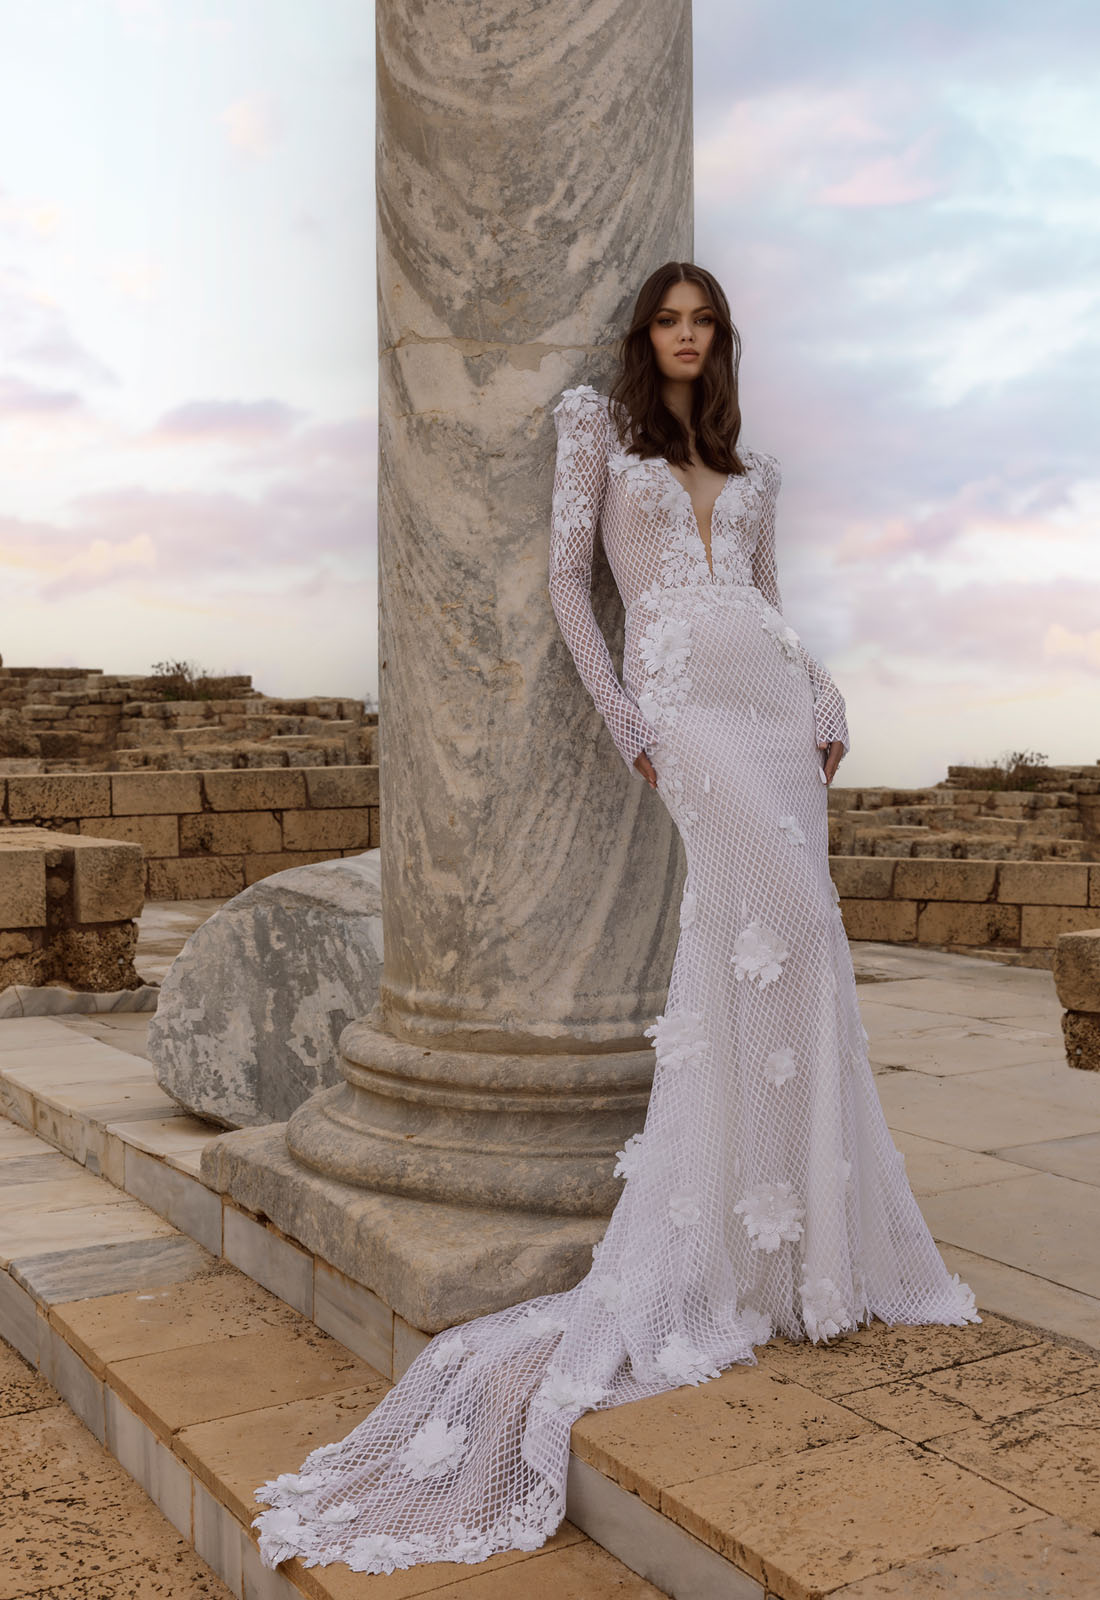 Discover more than 65 panina wedding gowns latest